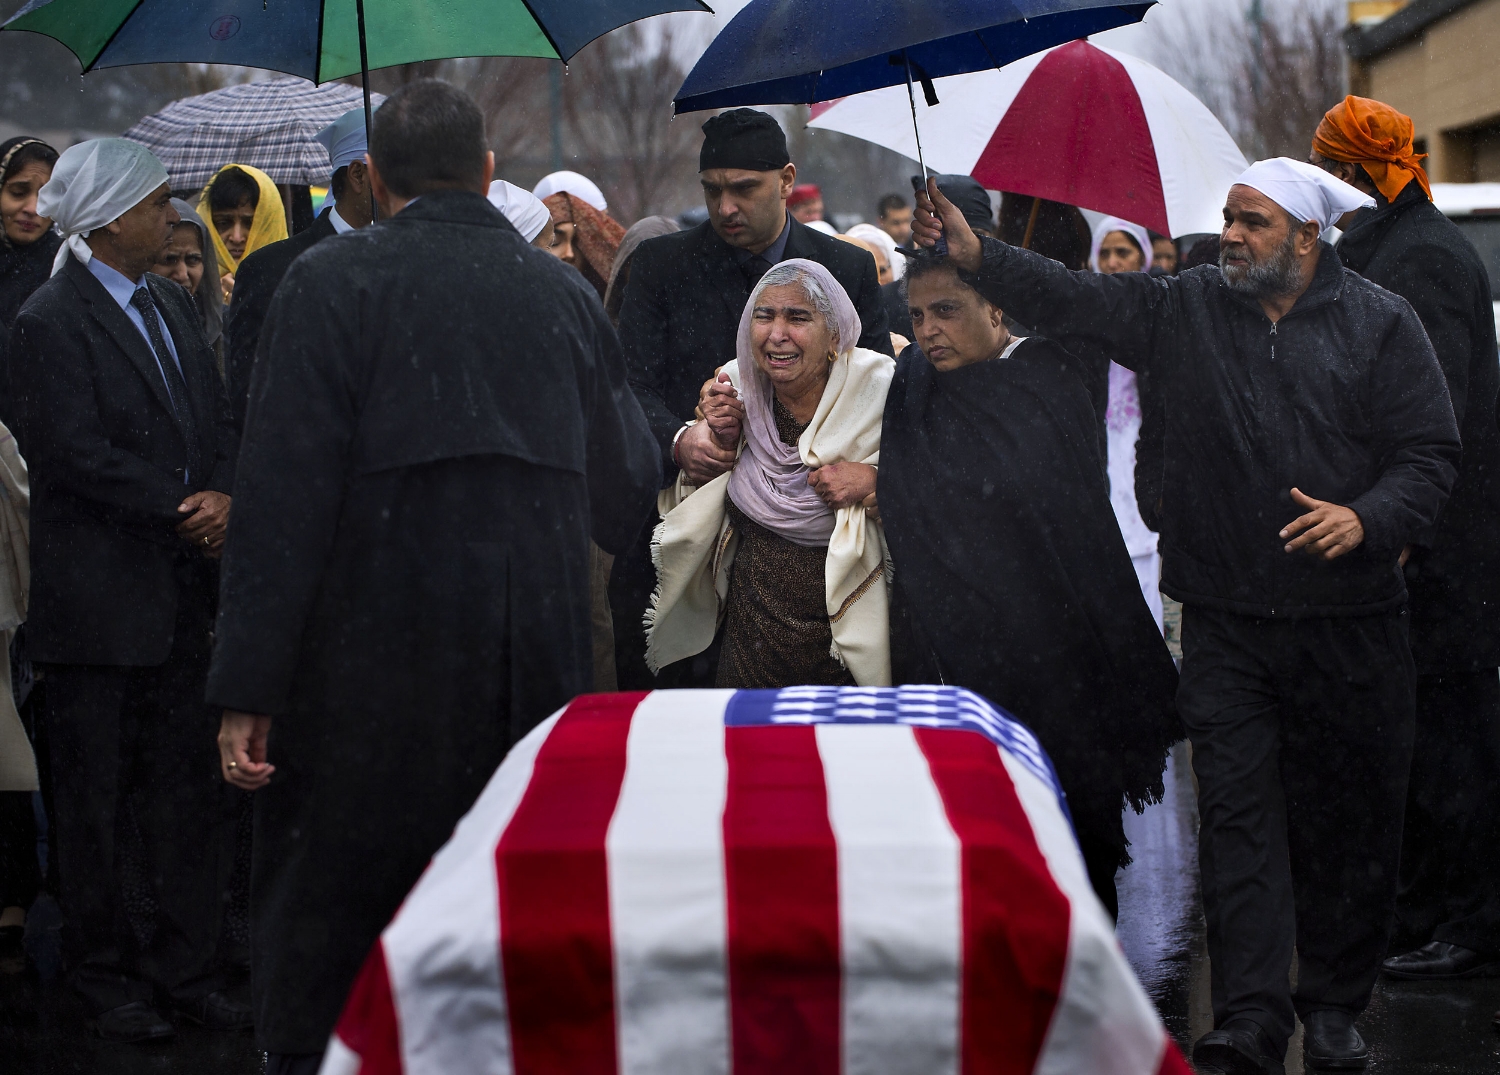  Sukhwinder Kaur, center, is escorted past the flag-draped casket of her son Parminder Singh Shergill at Cherokee Memorial Park in Lodi on Saturday, February 8, 2014. Parminder Singh Shergill was a US Army veteran and was shot to death by police in L